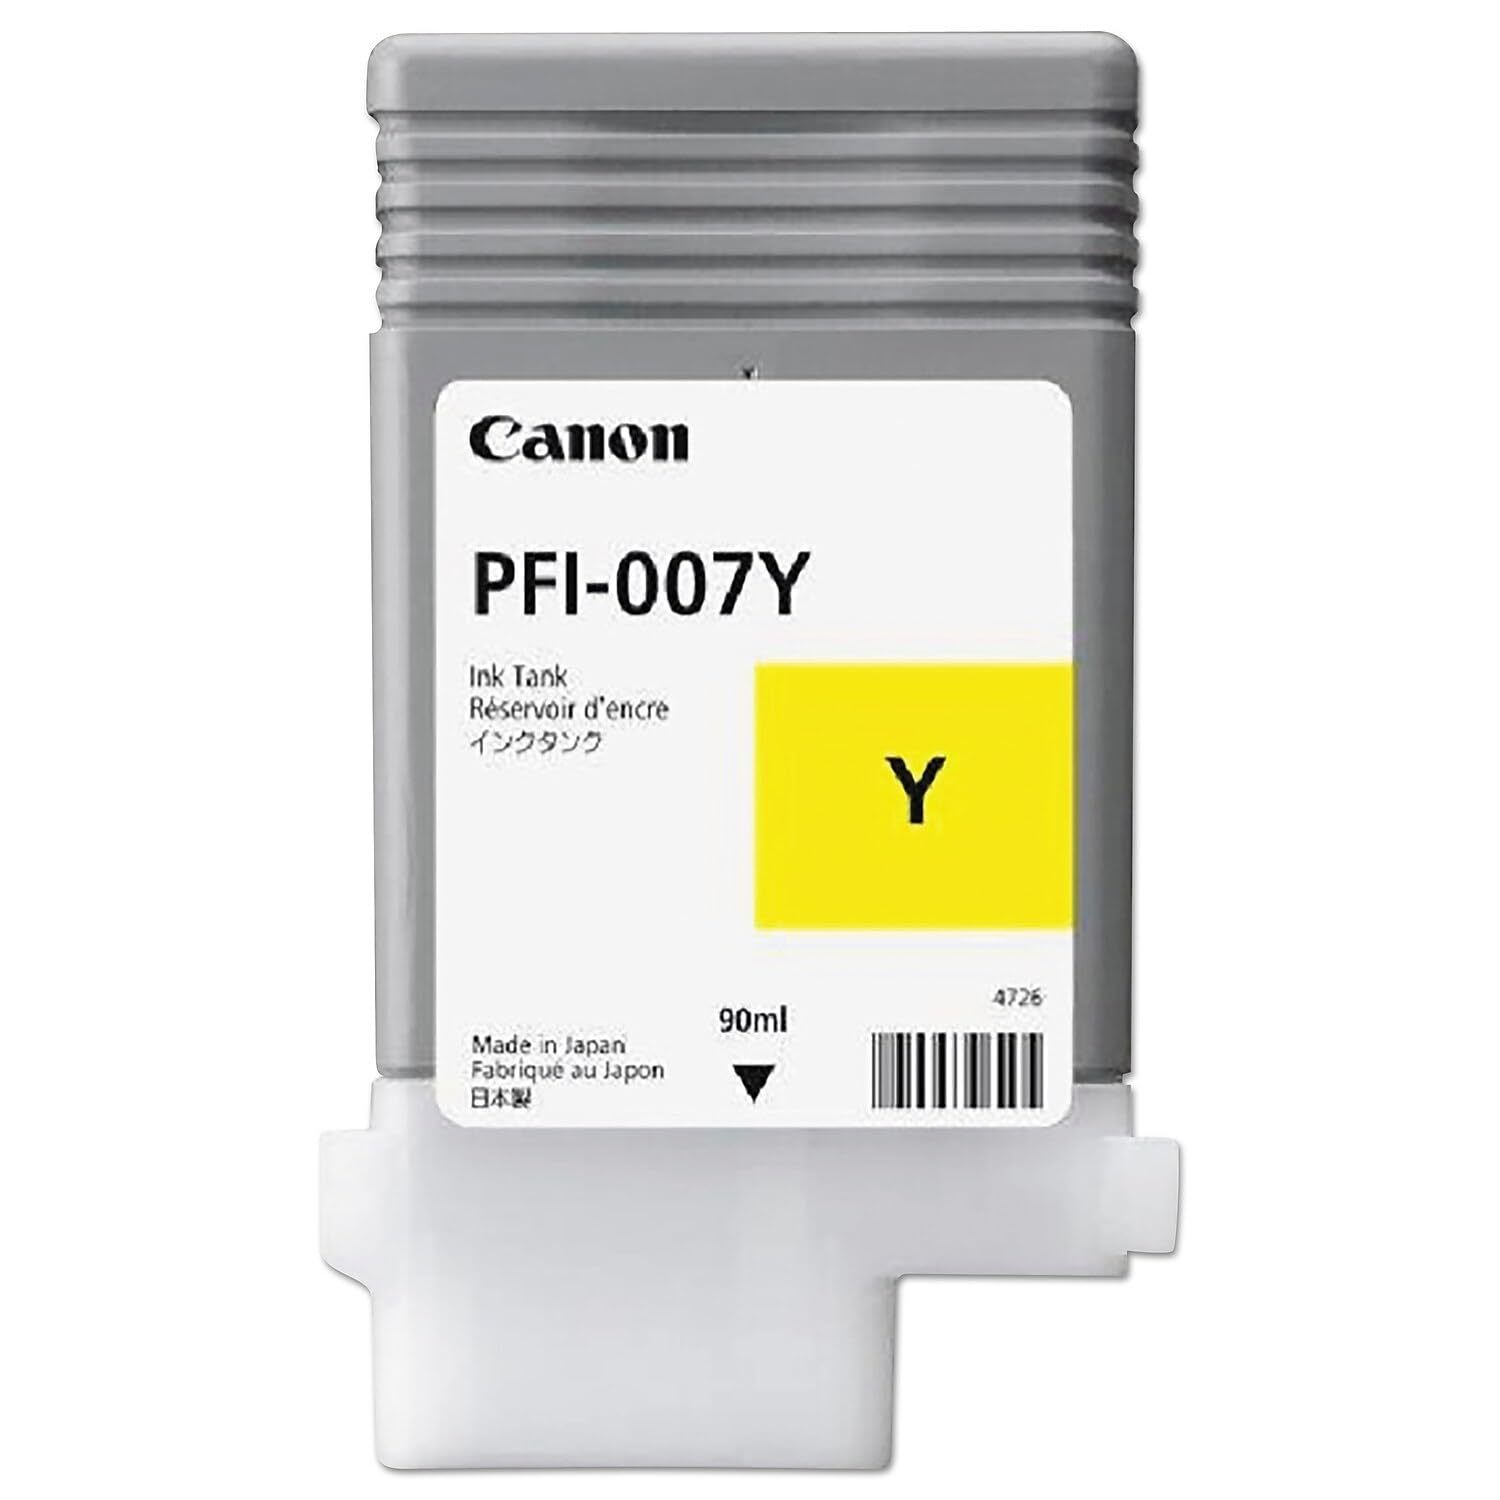 Primary image for Canon PFI-007Y Yellow Ink Tank (90mL)